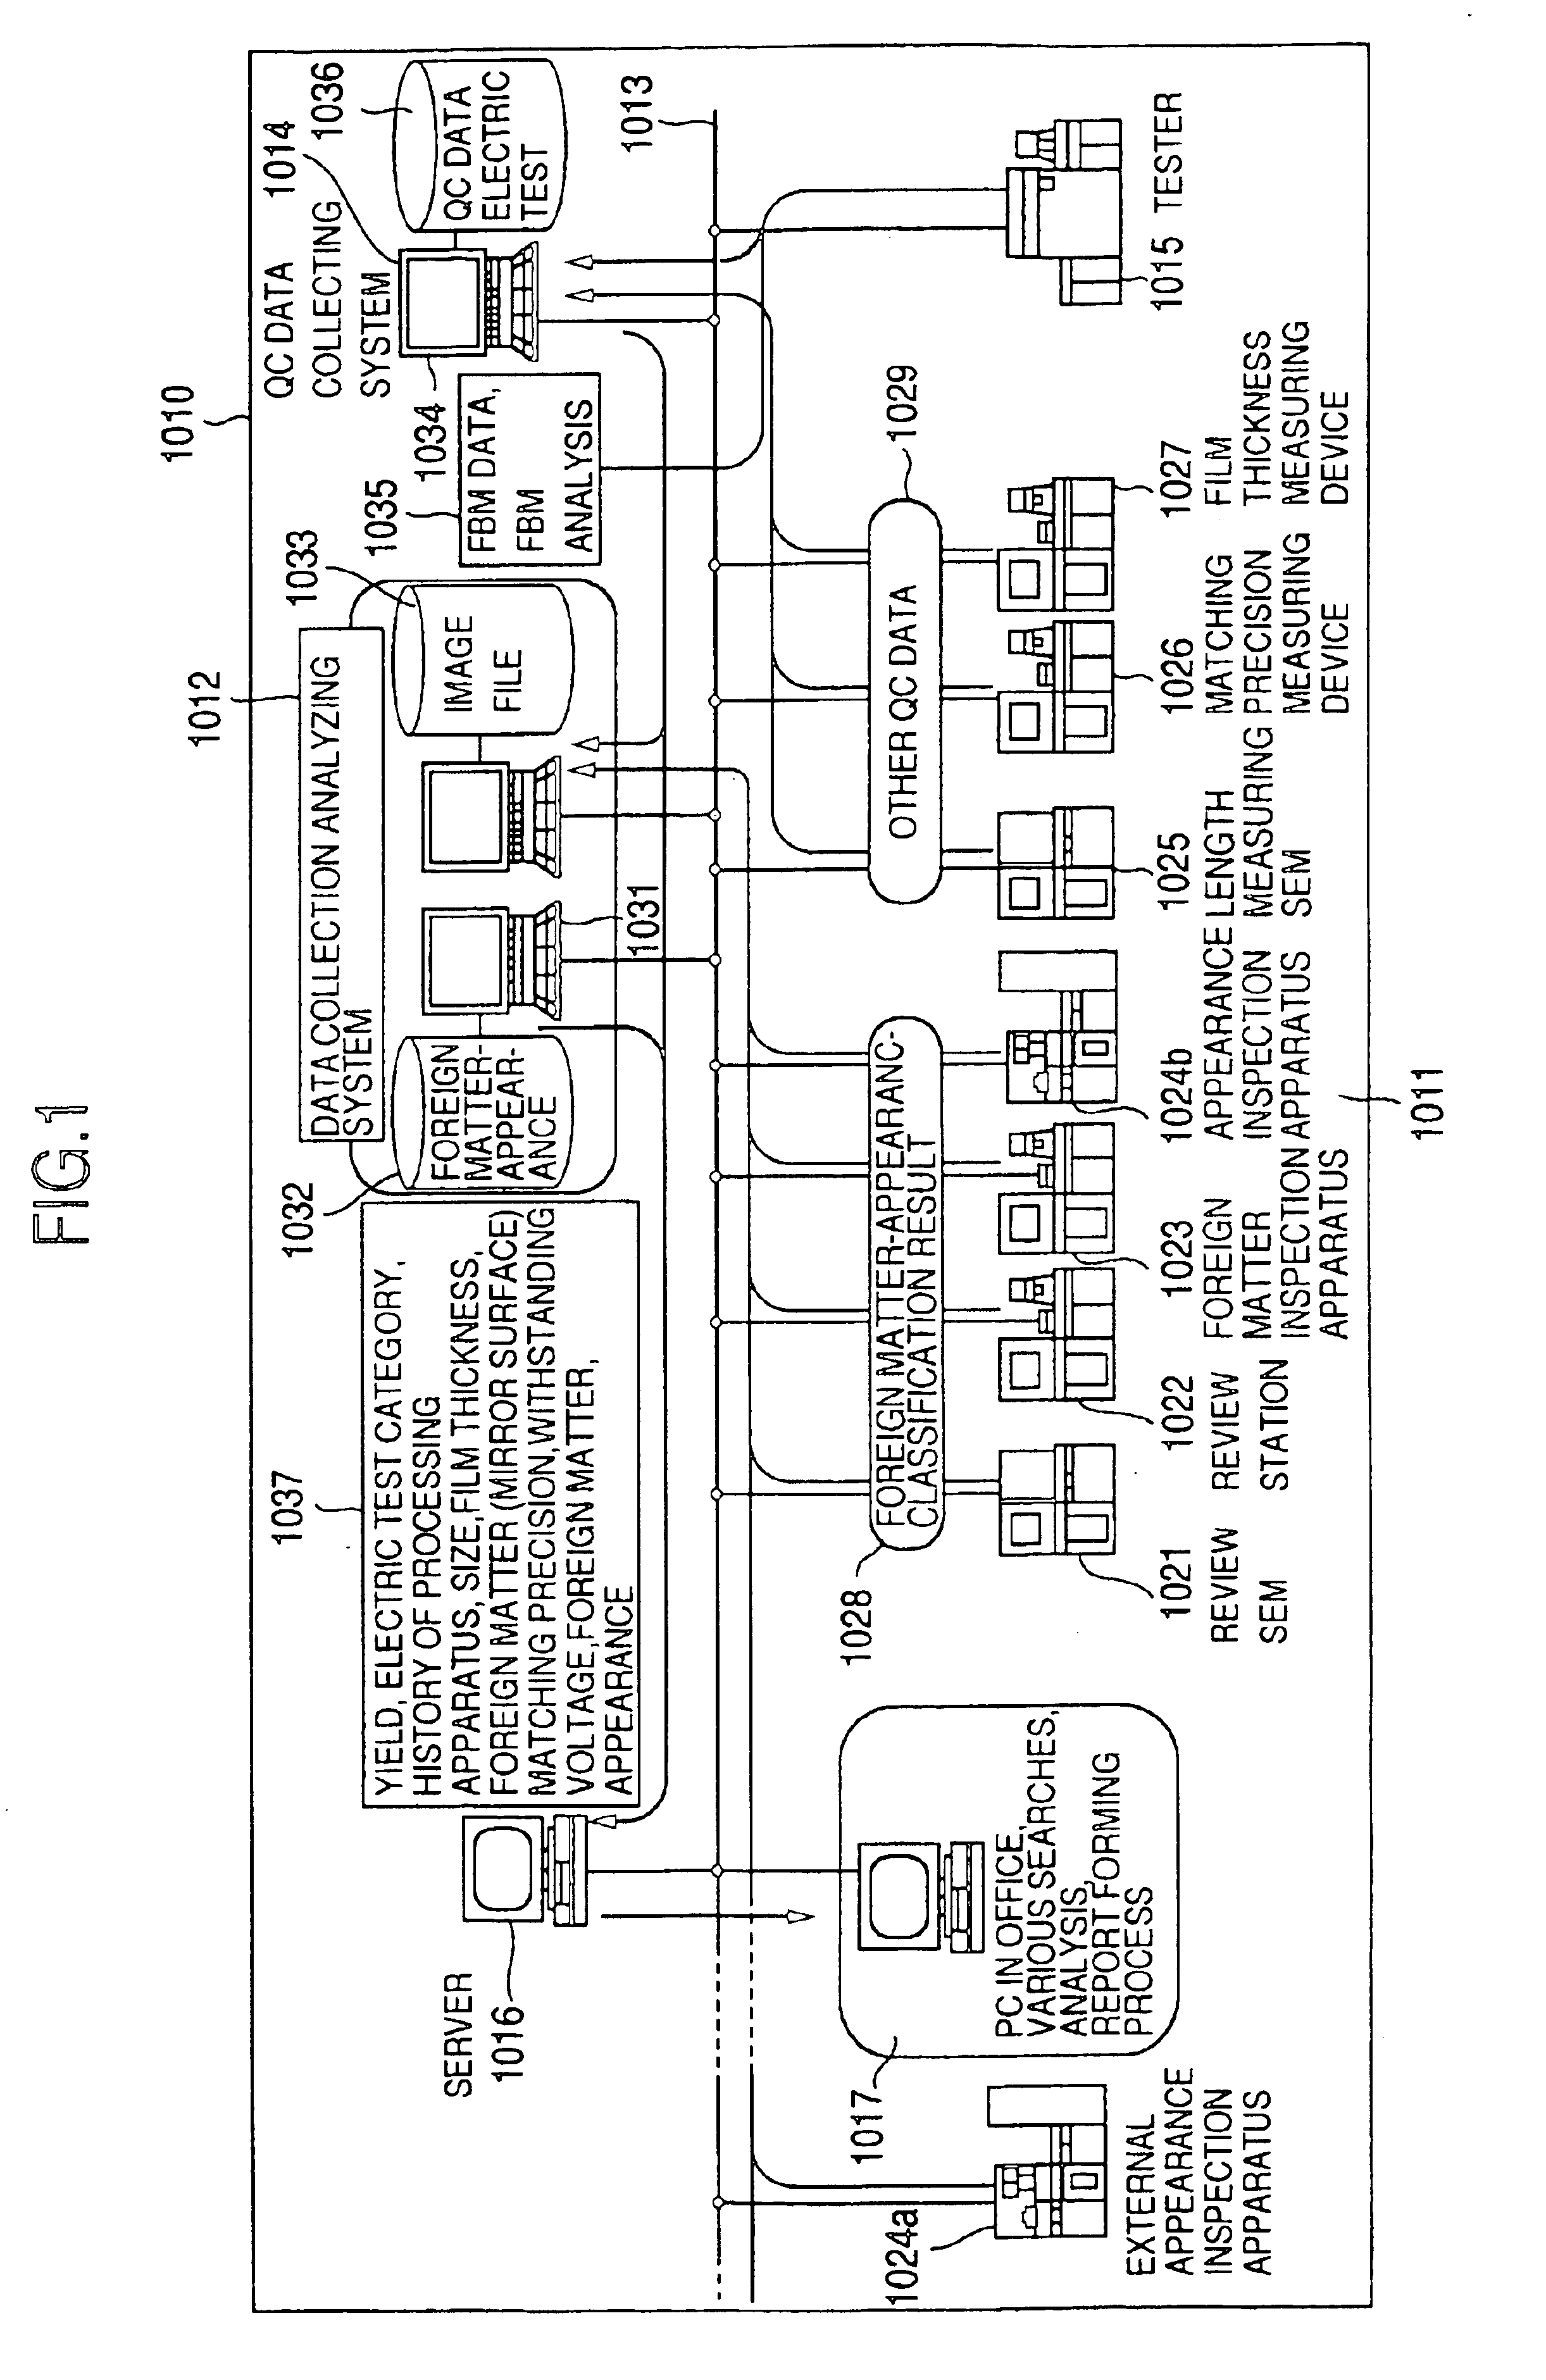 Inspection method, apparatus and system for circuit pattern